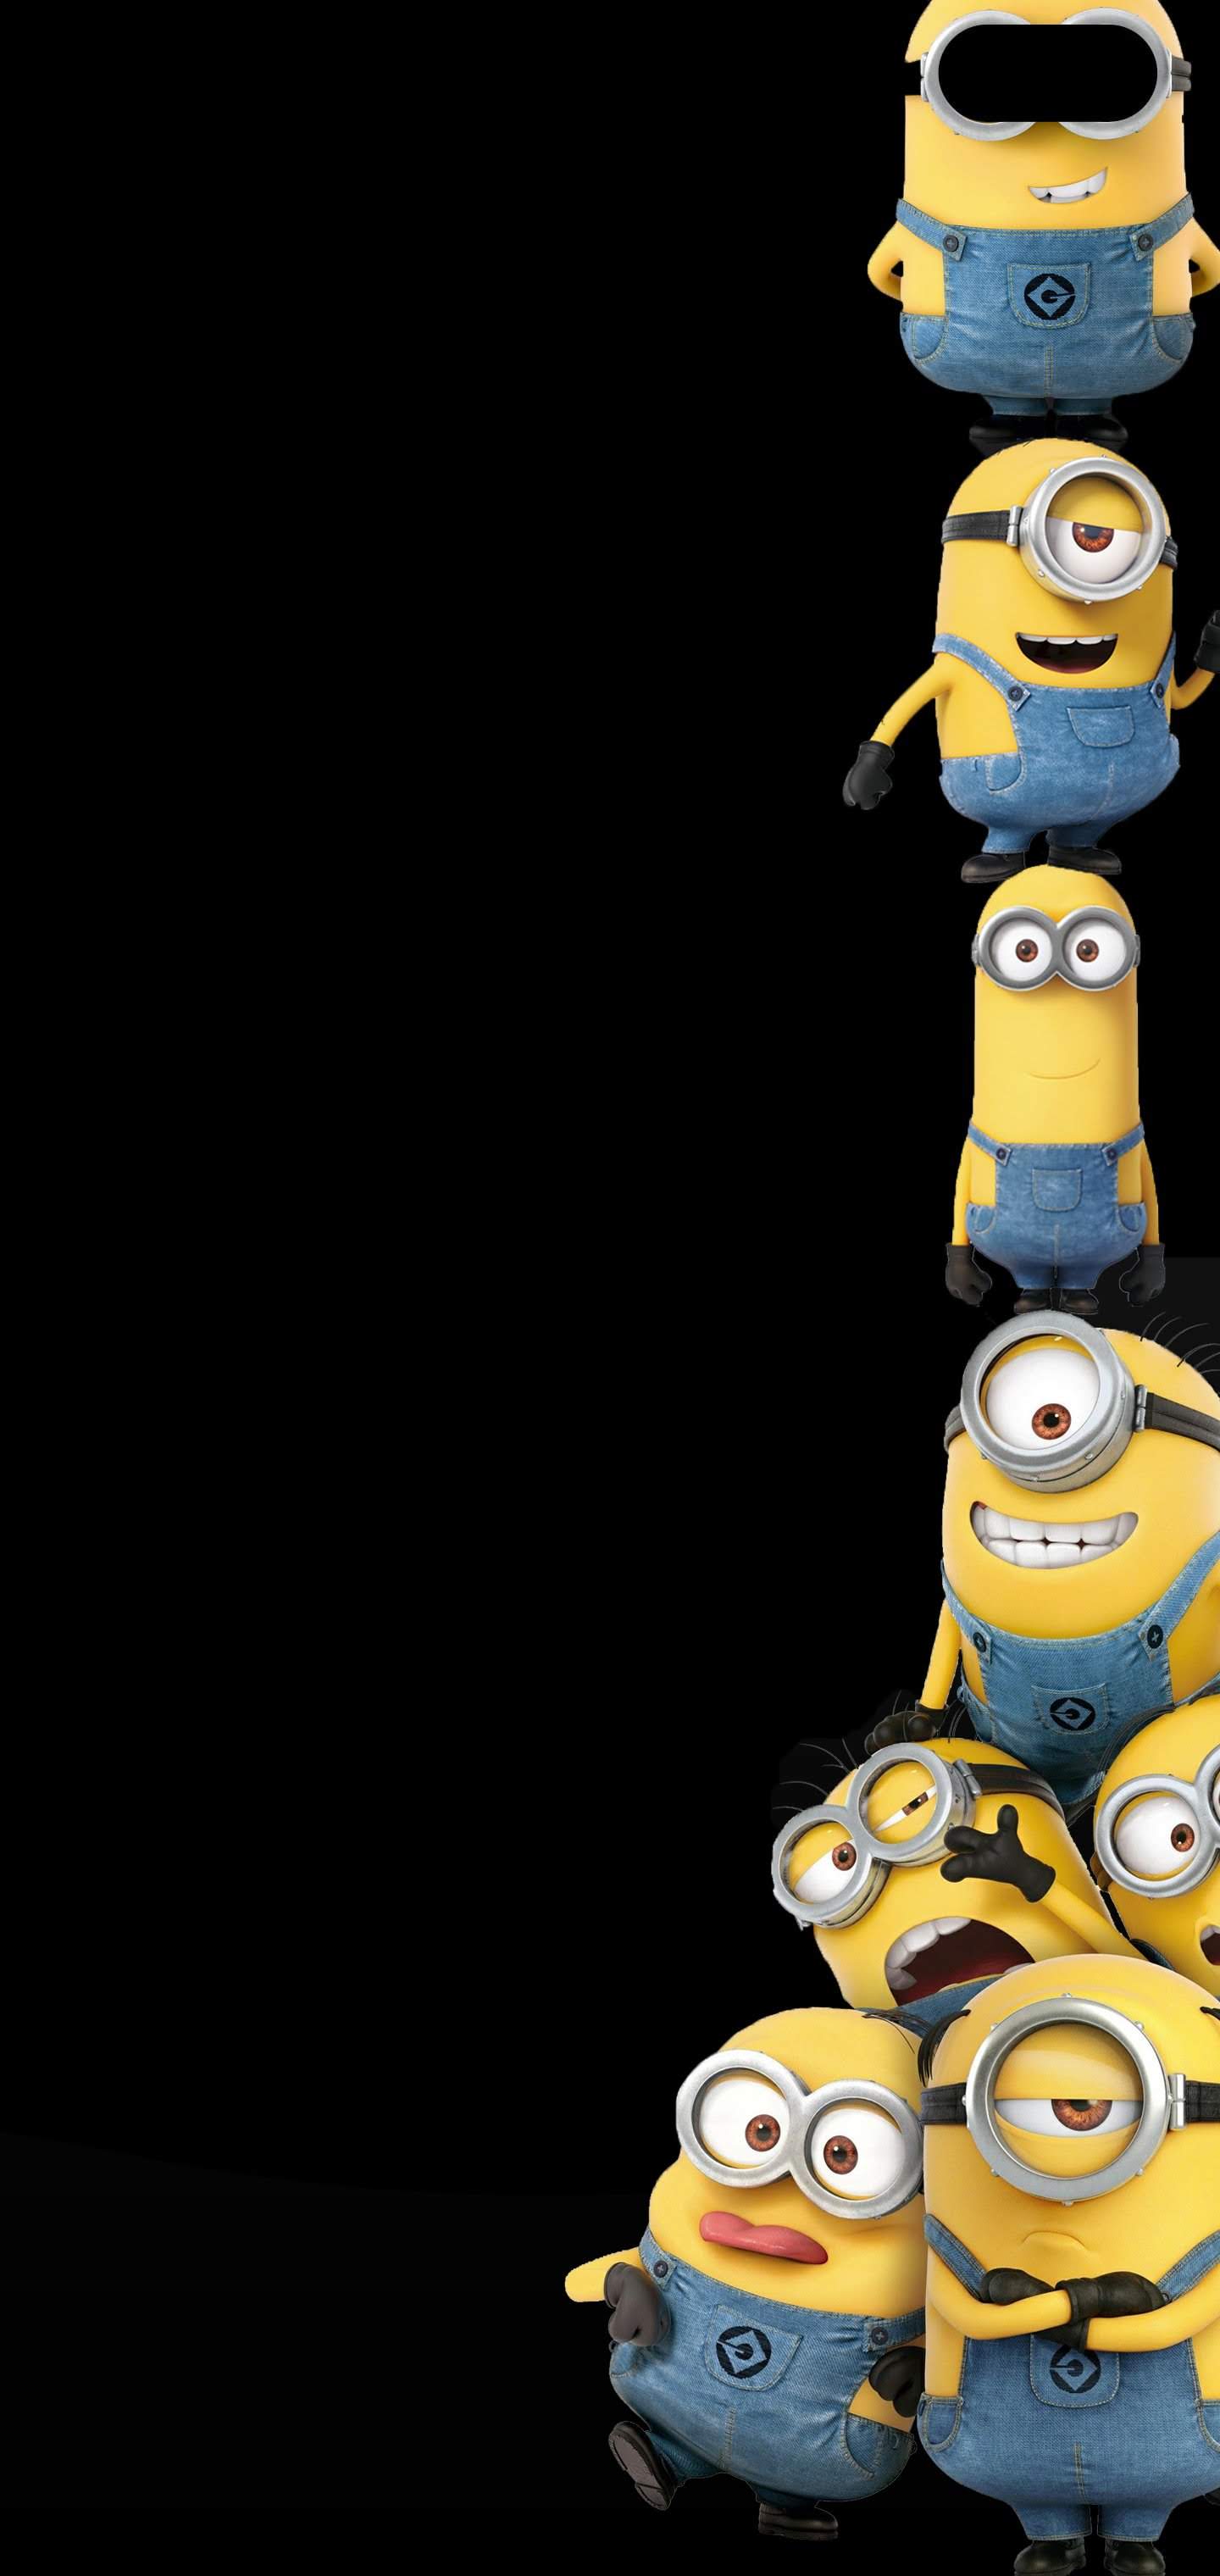 Amoled Minion Wallpapers - Wallpaper Cave